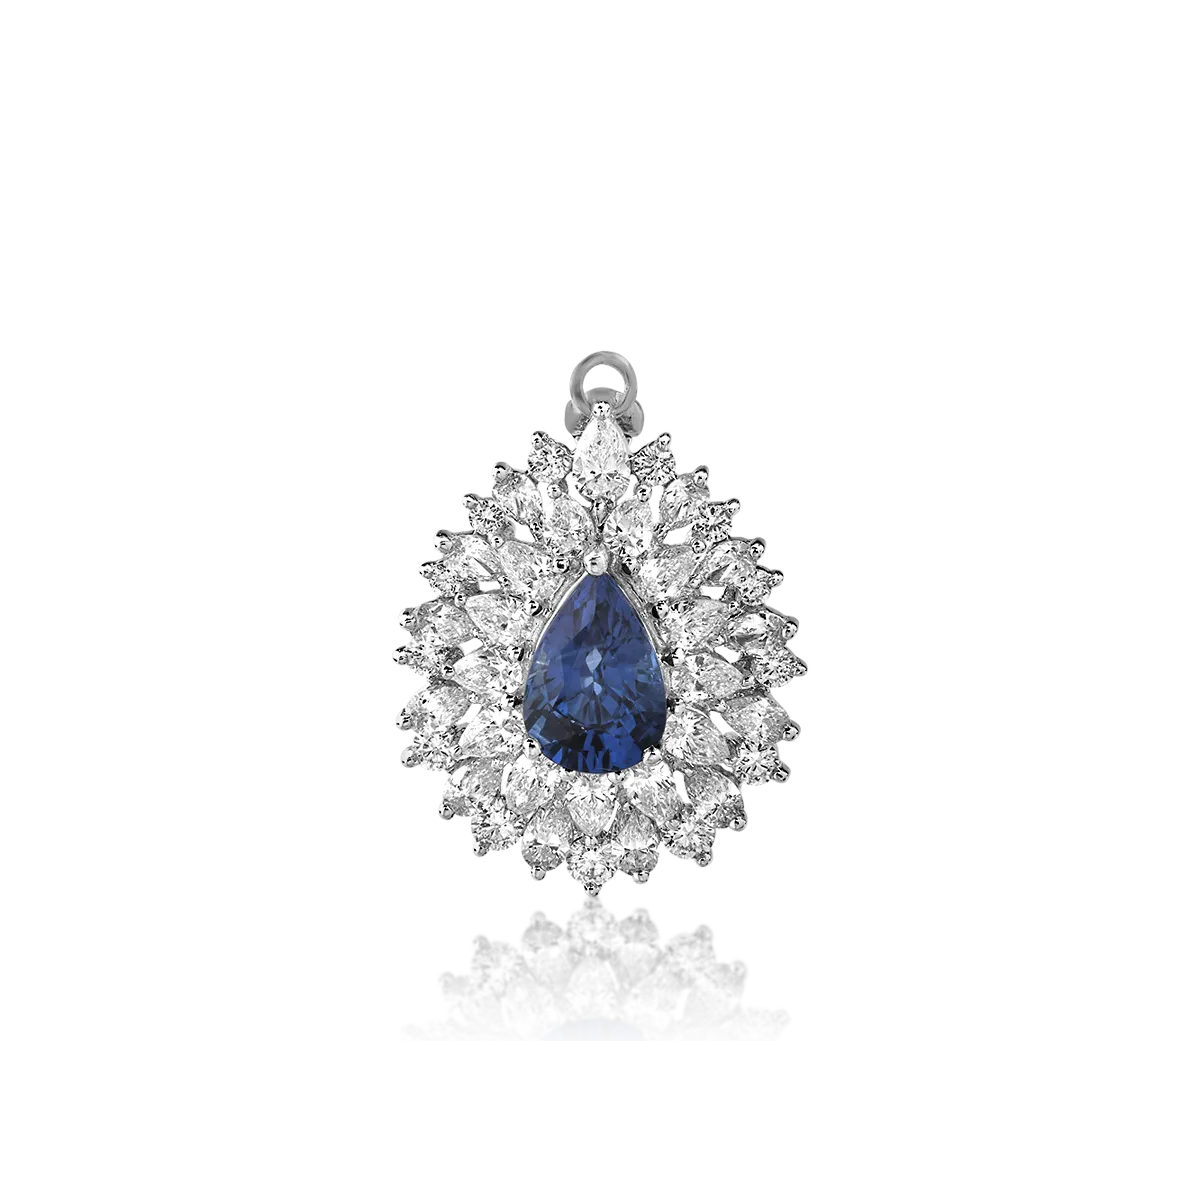 18K white gold pendant with sapphire of 1.98ct and diamonds of 1.9ct